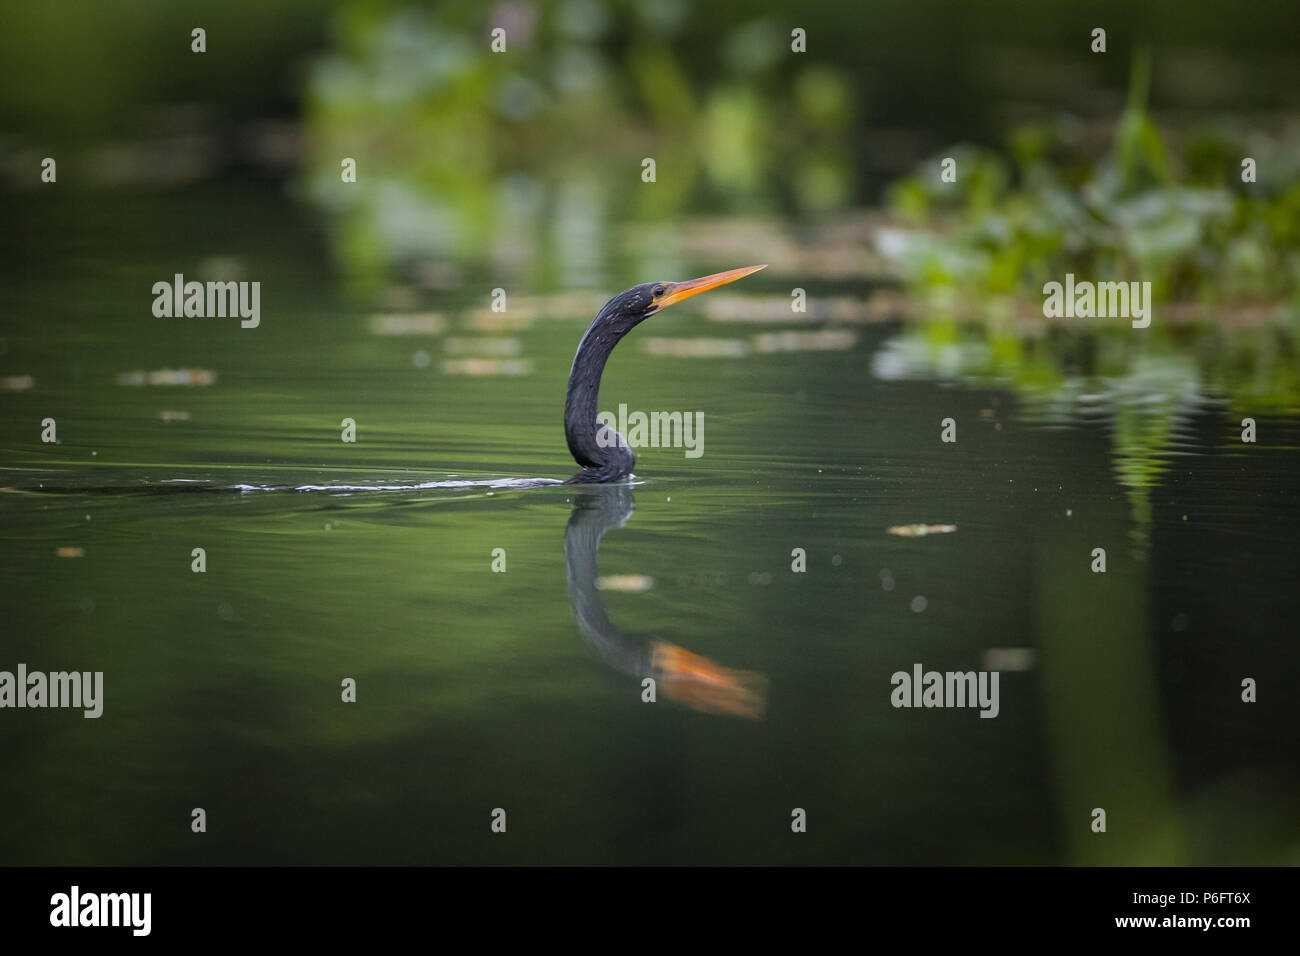 Anhinga swimming with only the head above the water surface, Rio Chagres, Soberania National Park, Republic of Panama. Stock Photo